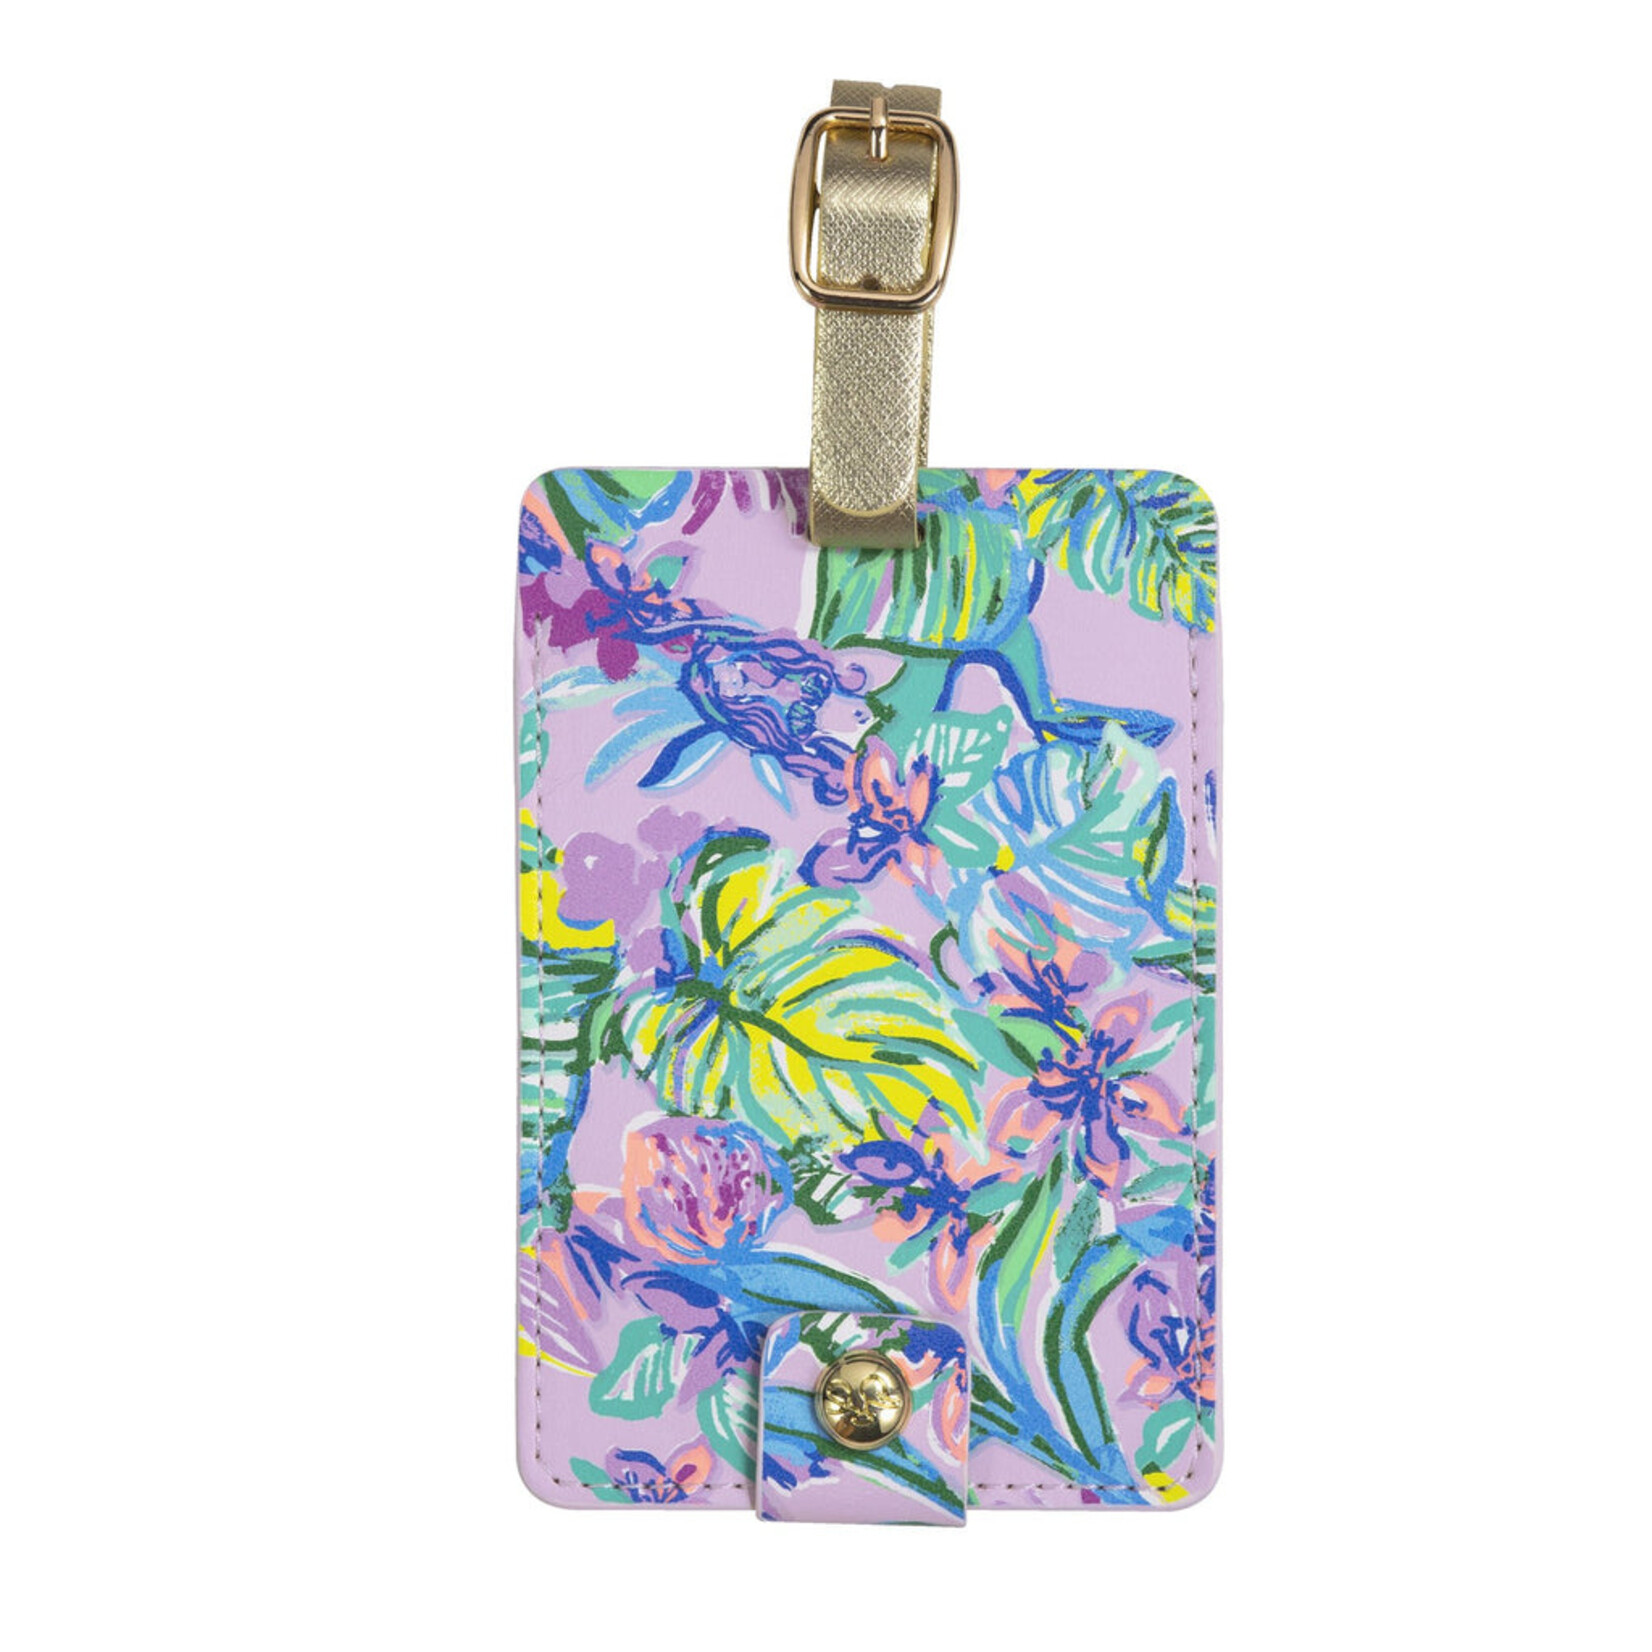 Lilly Pulitzer Lilly Pulitzer Luggage Tag-Mermaid in the Shade